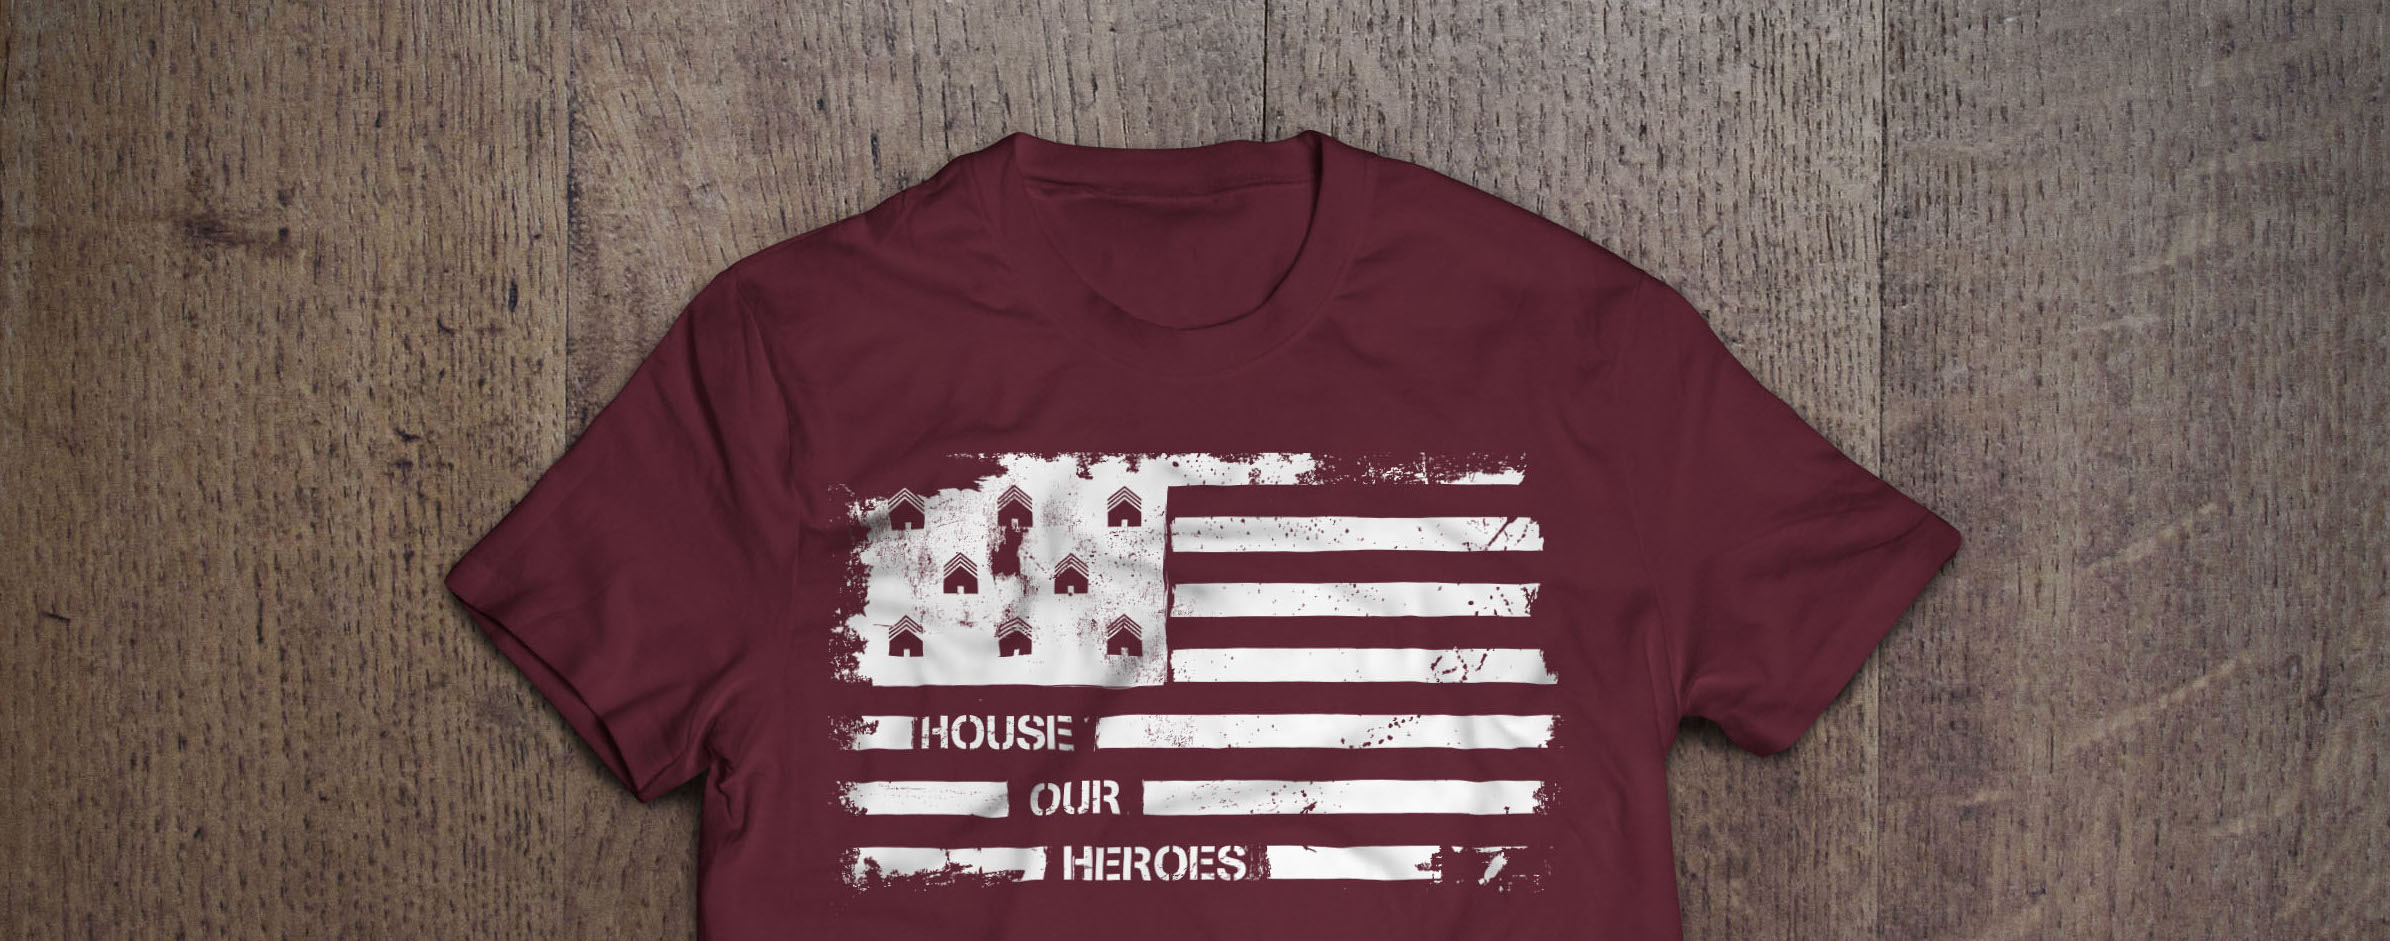 House our Heroes t-shirt